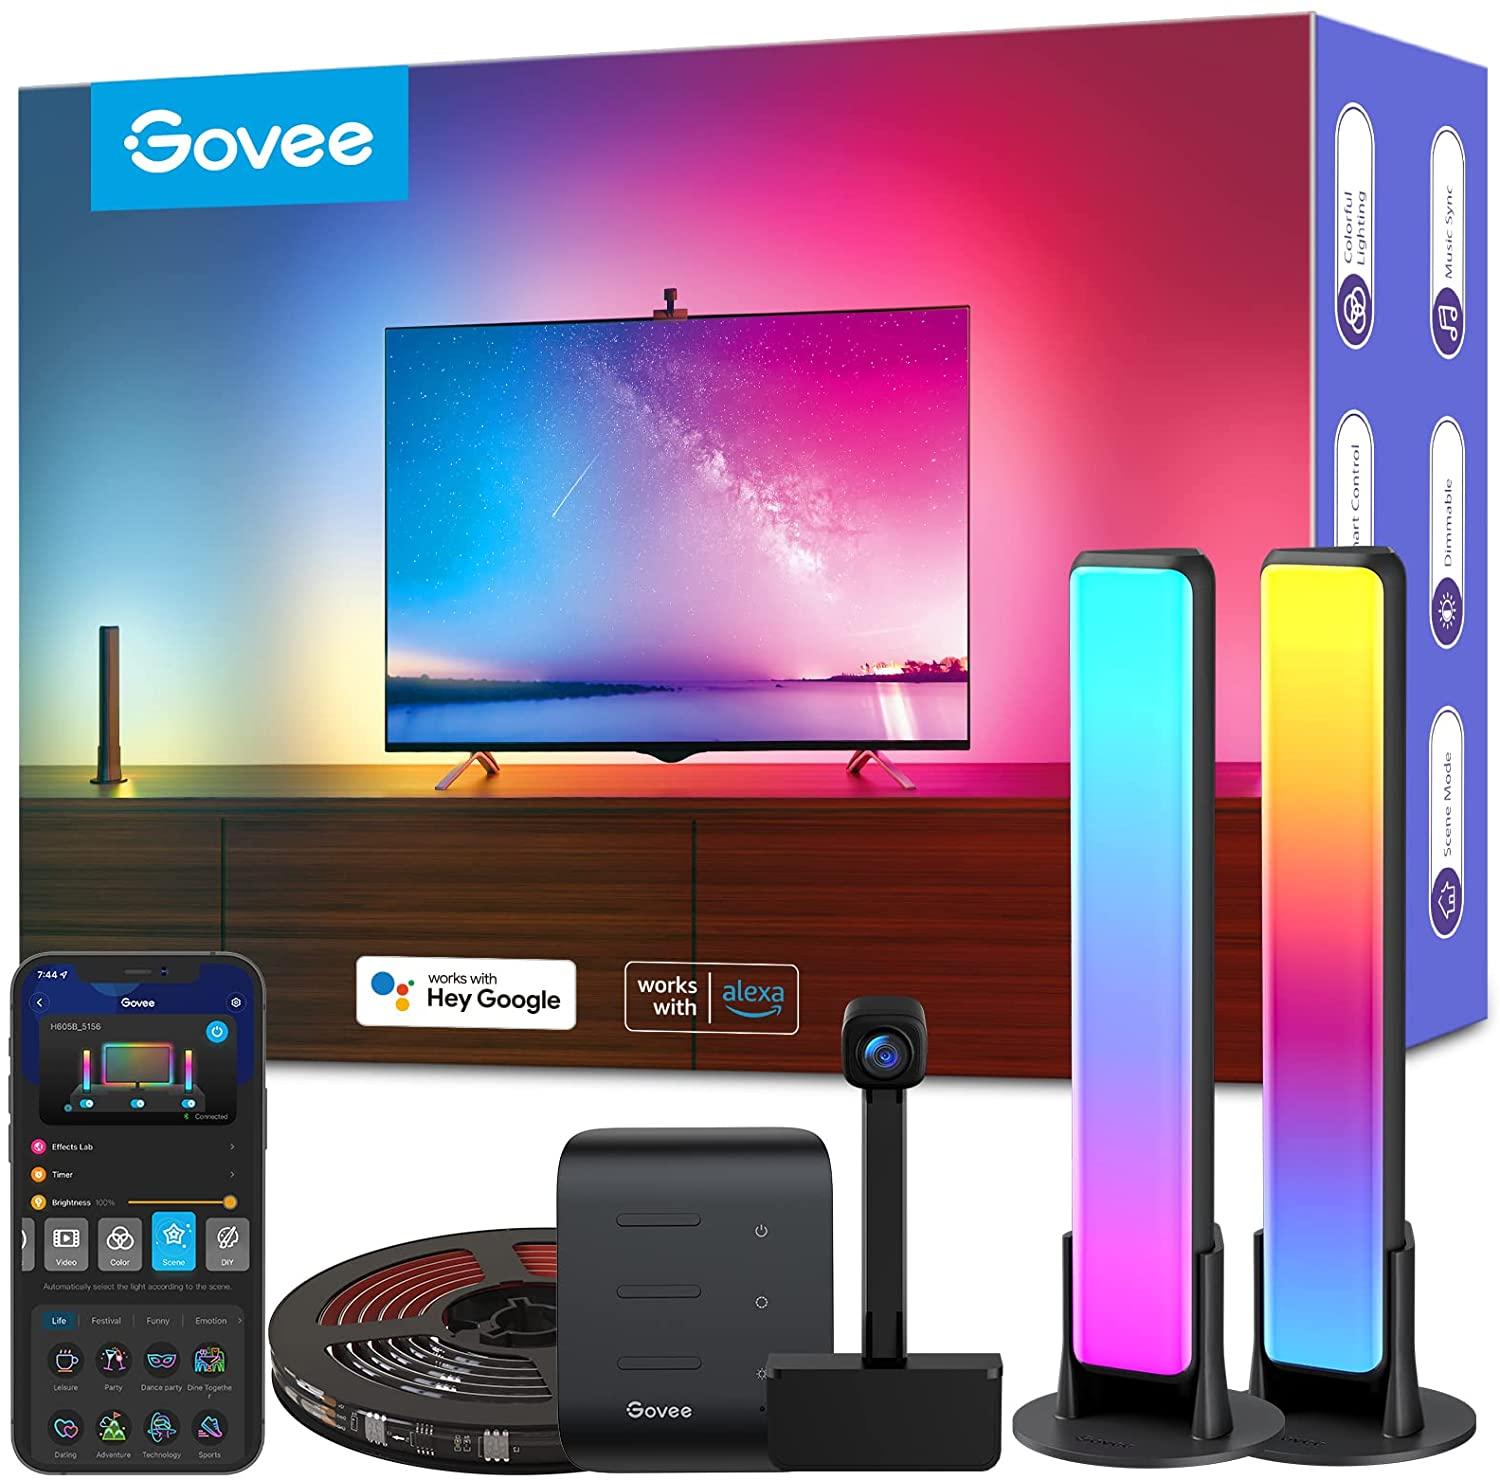 Govee DreamView T1 Pro TV LED Backlights with Light Bars for $89.99 Shipped